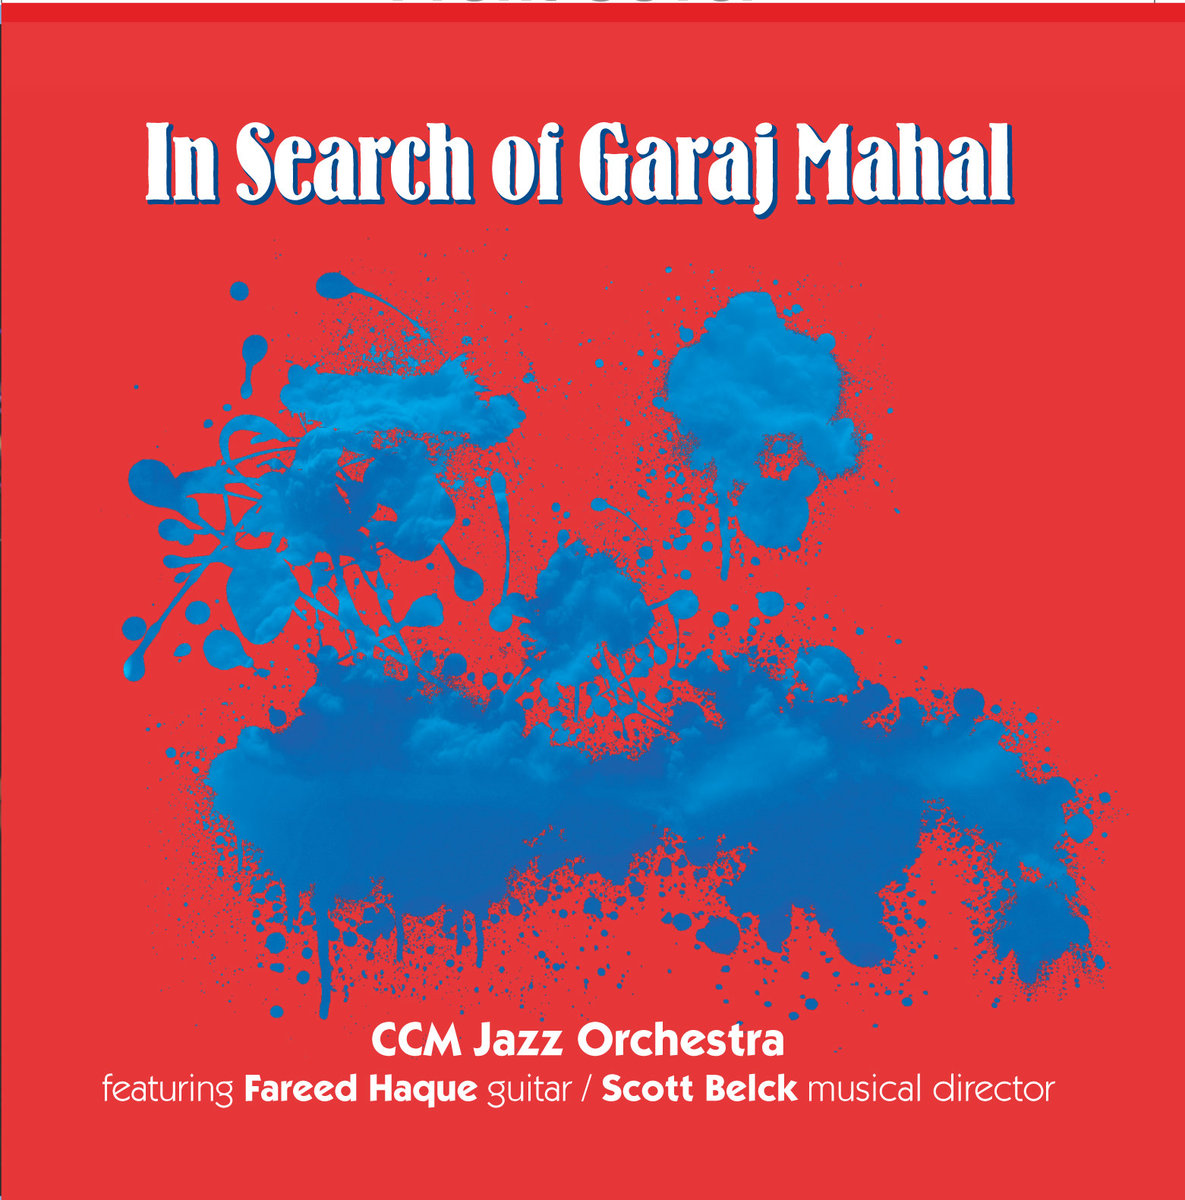 THE CCM (CINCINNATI CONSERVATORY OF MUSIC) JAZZ ORCHESTRA - CCM Jazz Orchestra ft. Fareed Haque : In Search of Garaj Mahal cover 